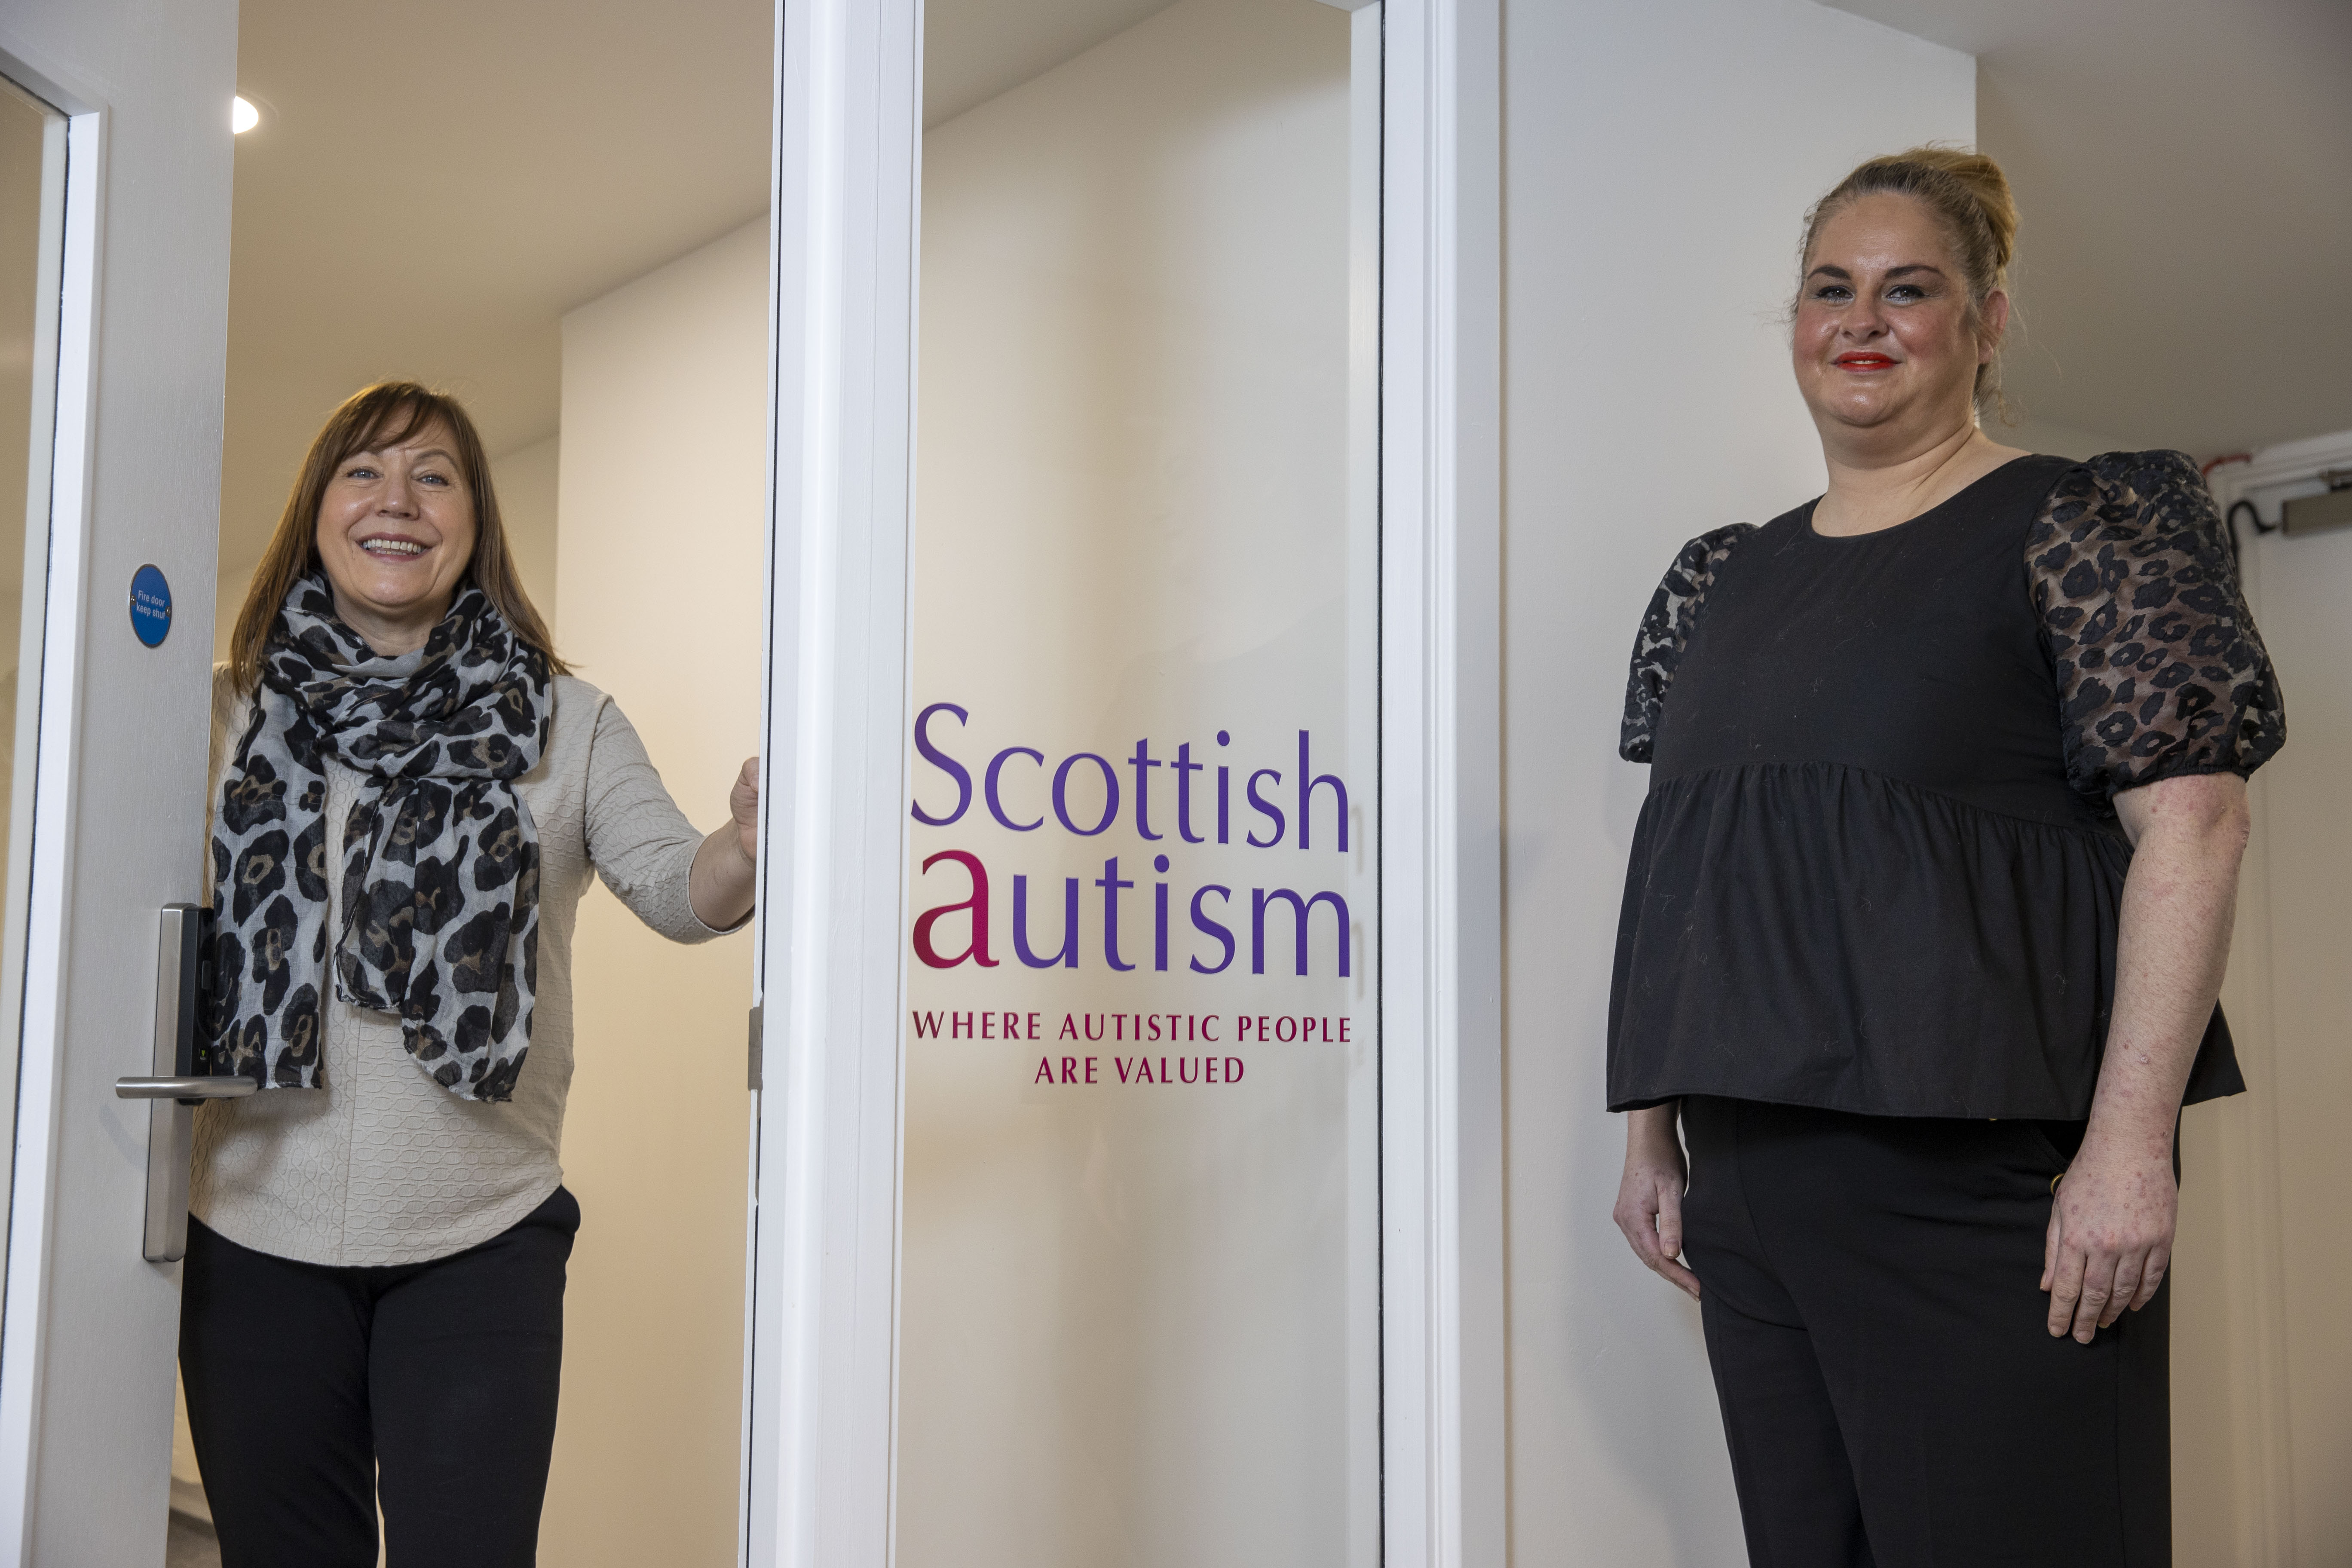 Autism support in north Glasgow boosted by Queens Cross 